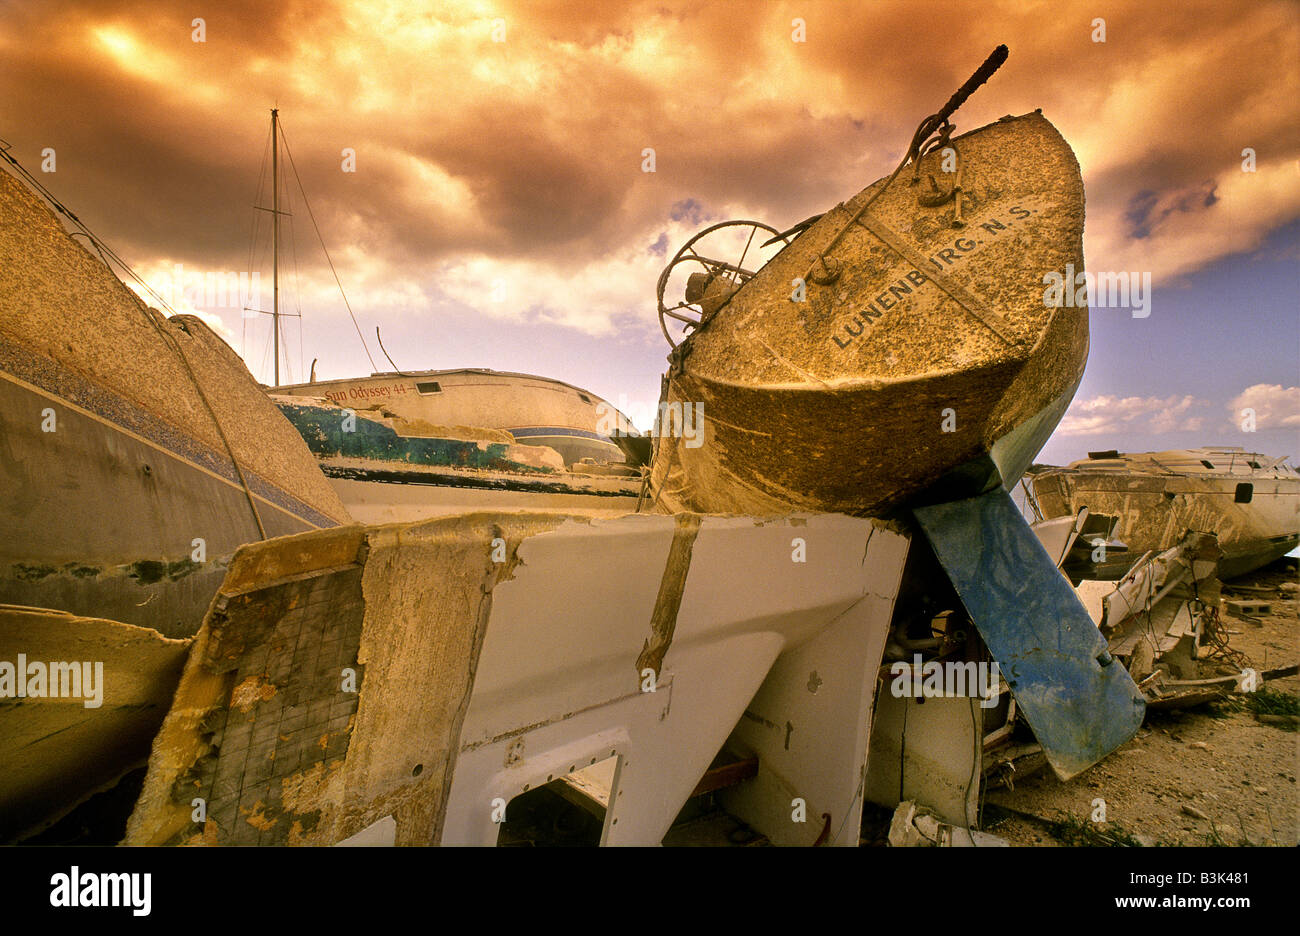 Destruction of a harbor area on the island of St Maarten after a hurricane Stock Photo